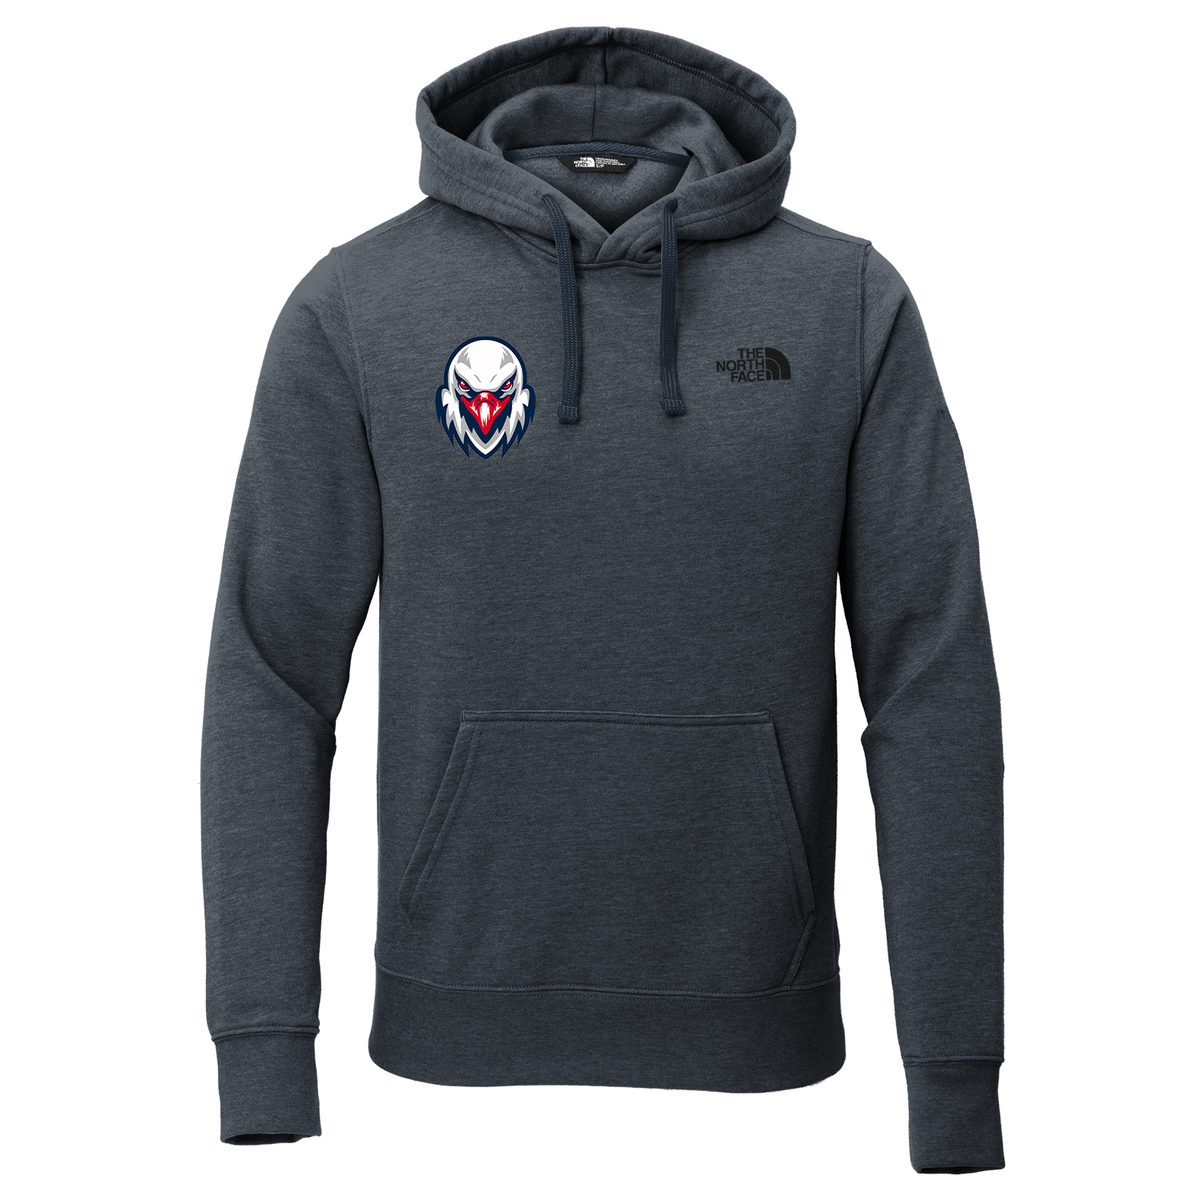 Cold Spring Harbor PAL The North Face Pullover Hoodie